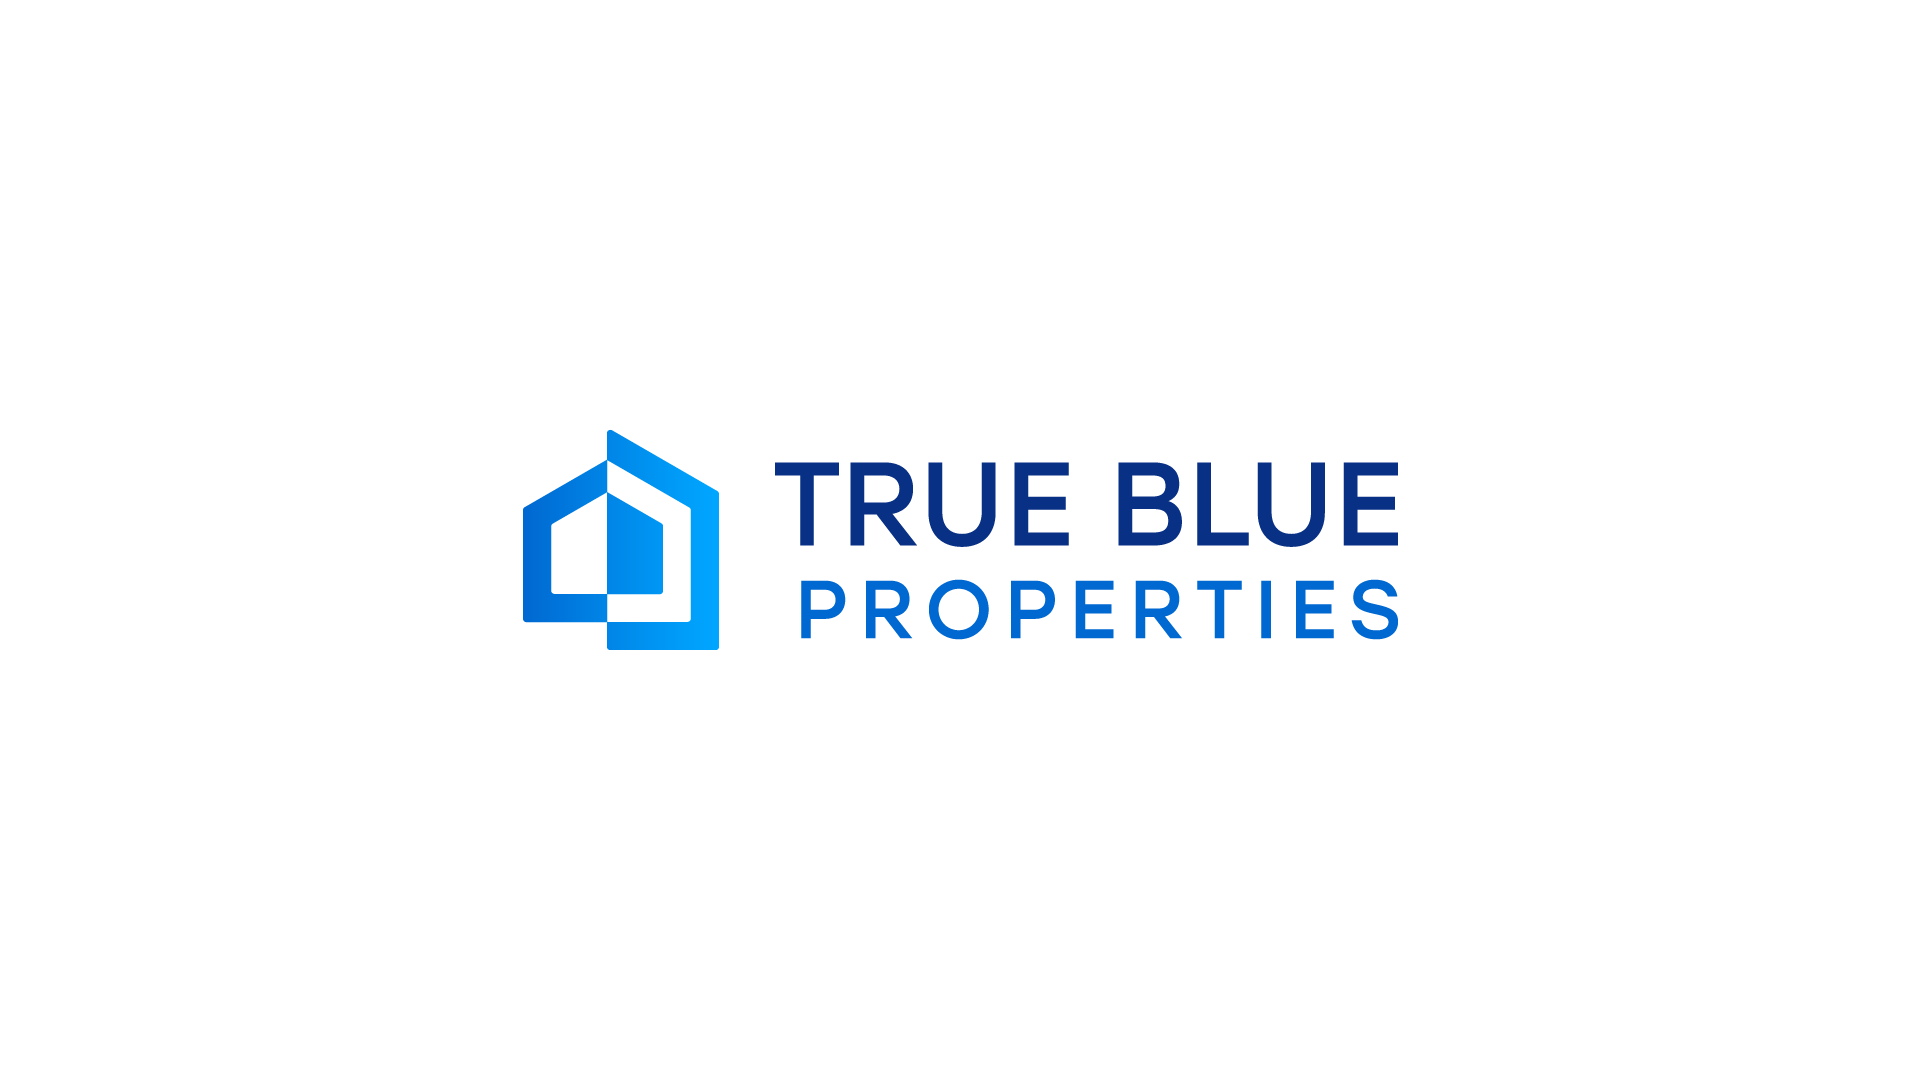 True Blue Properties - Real Estate Company logo, blue house with multiple layers, symbolizing depth and reliable real estate services